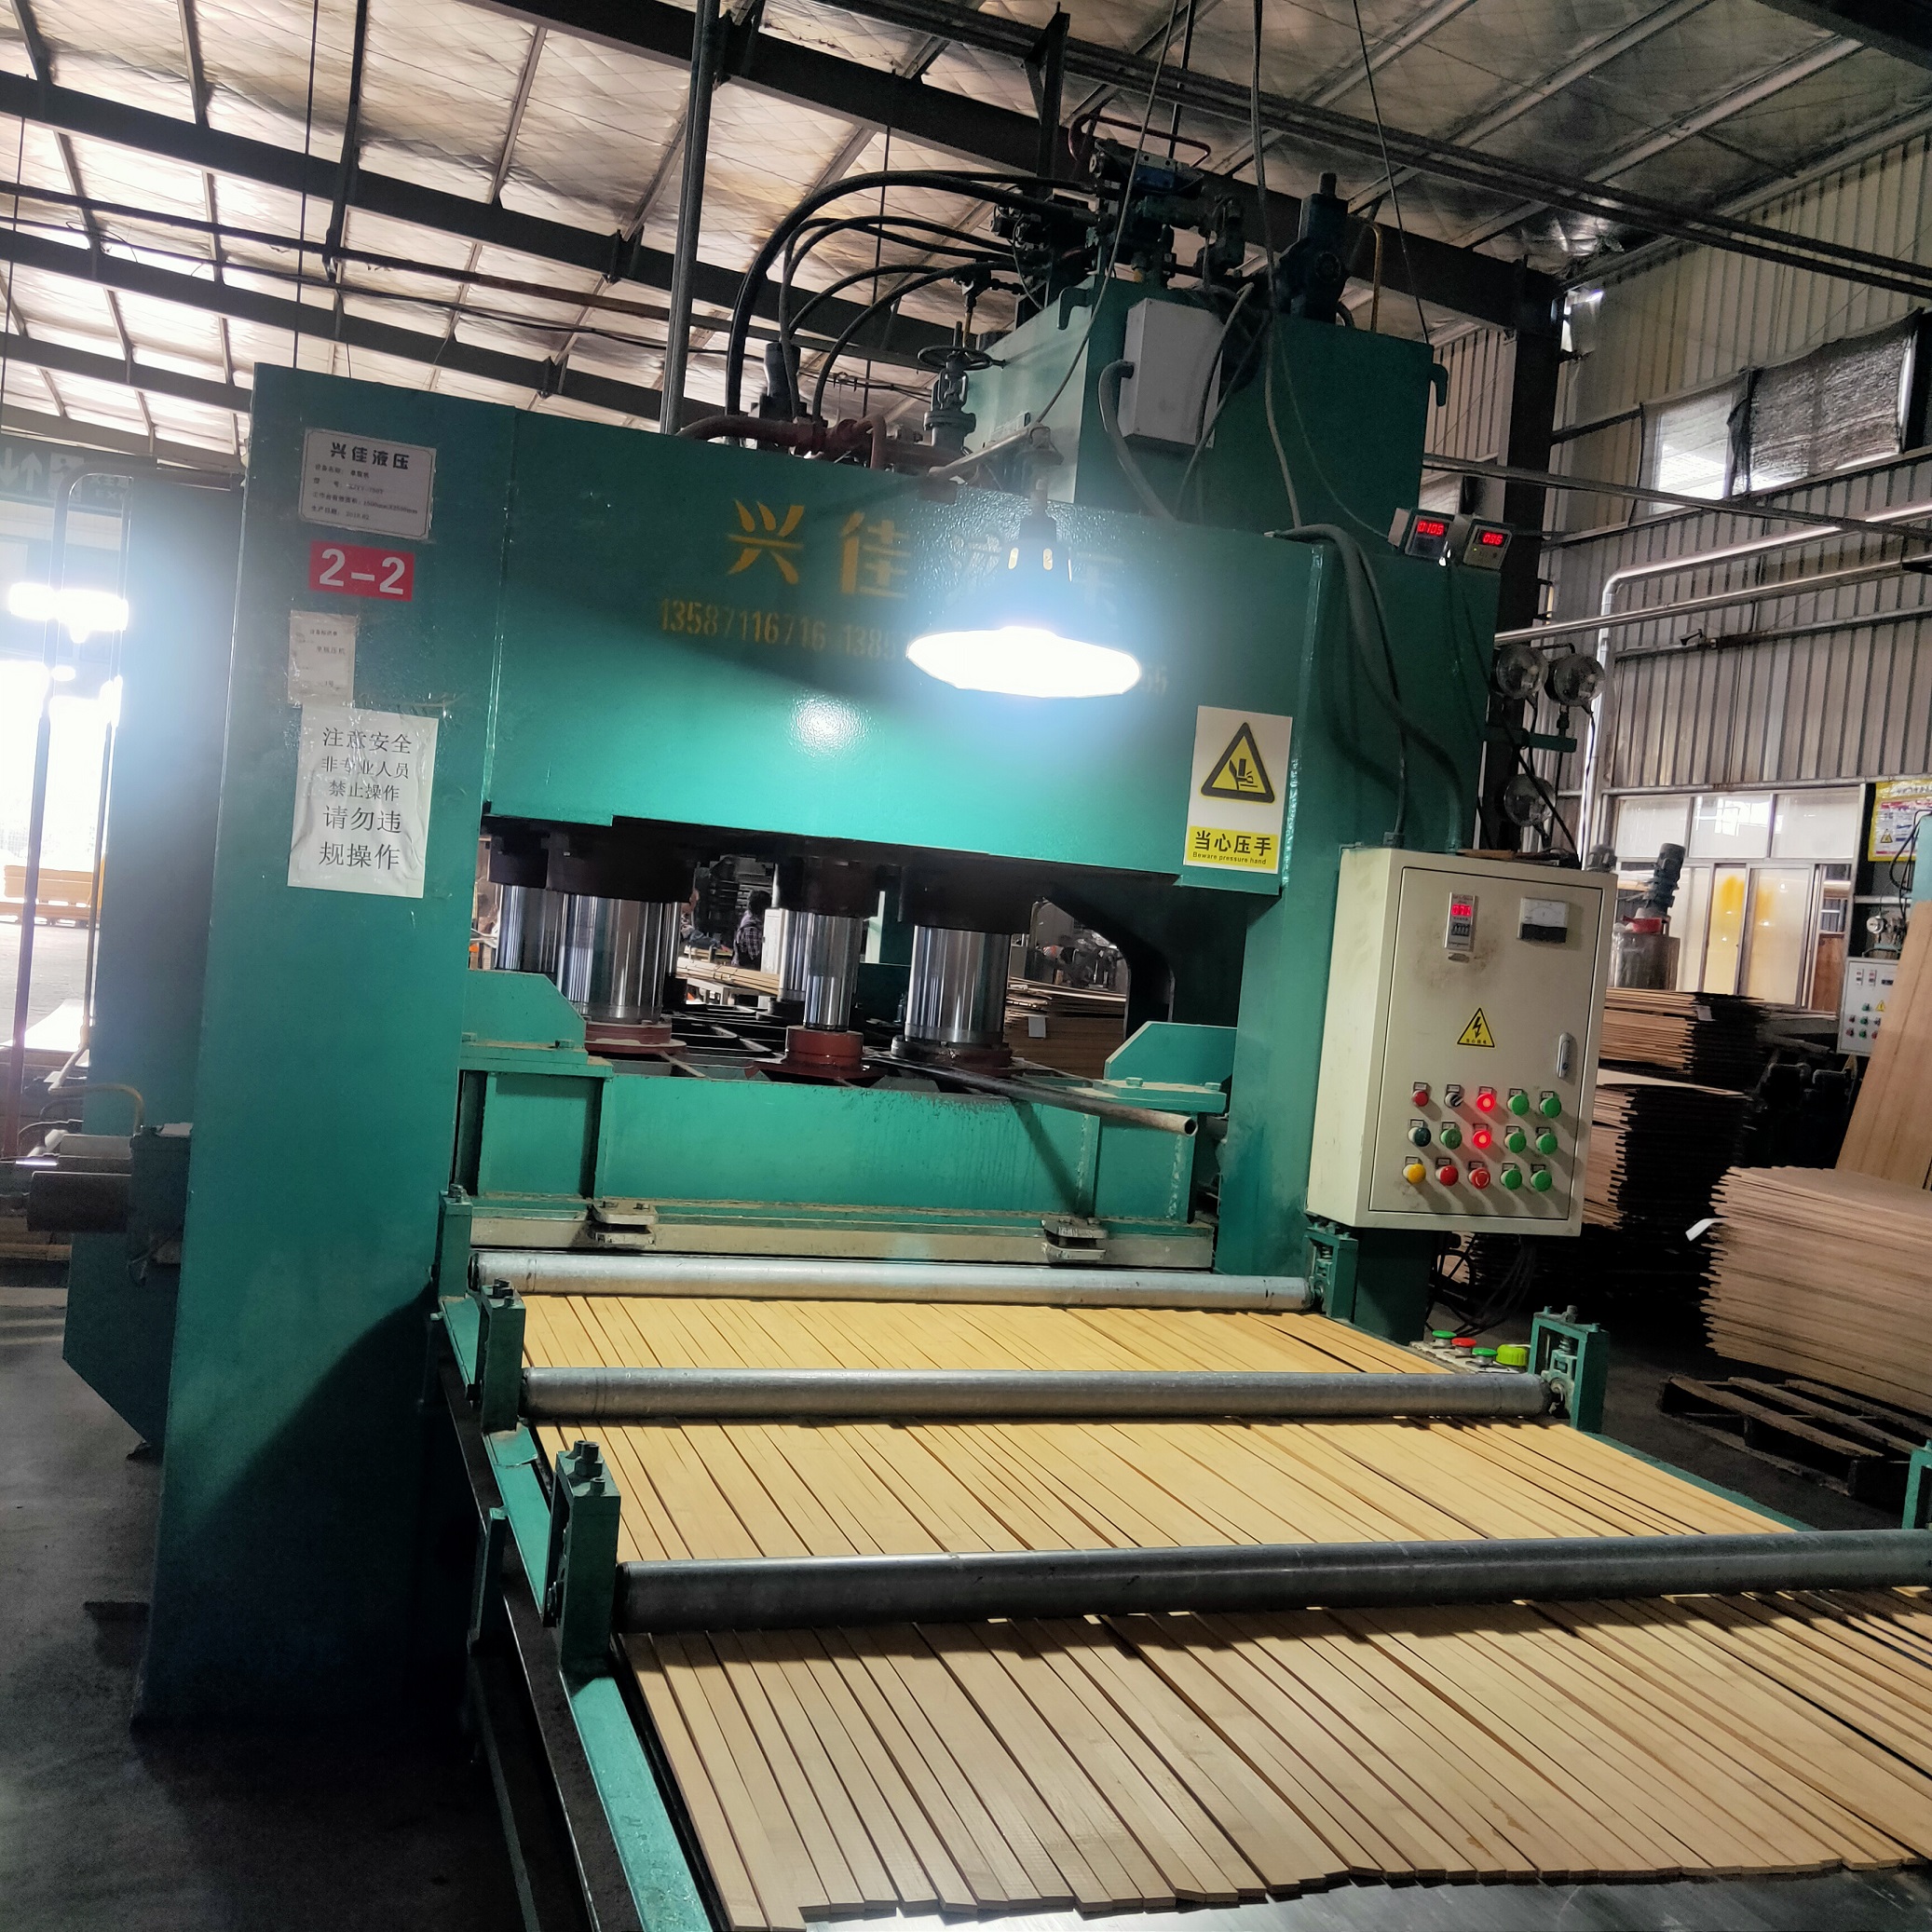 How does the plate hot press machine in the bamboo plate factory work？